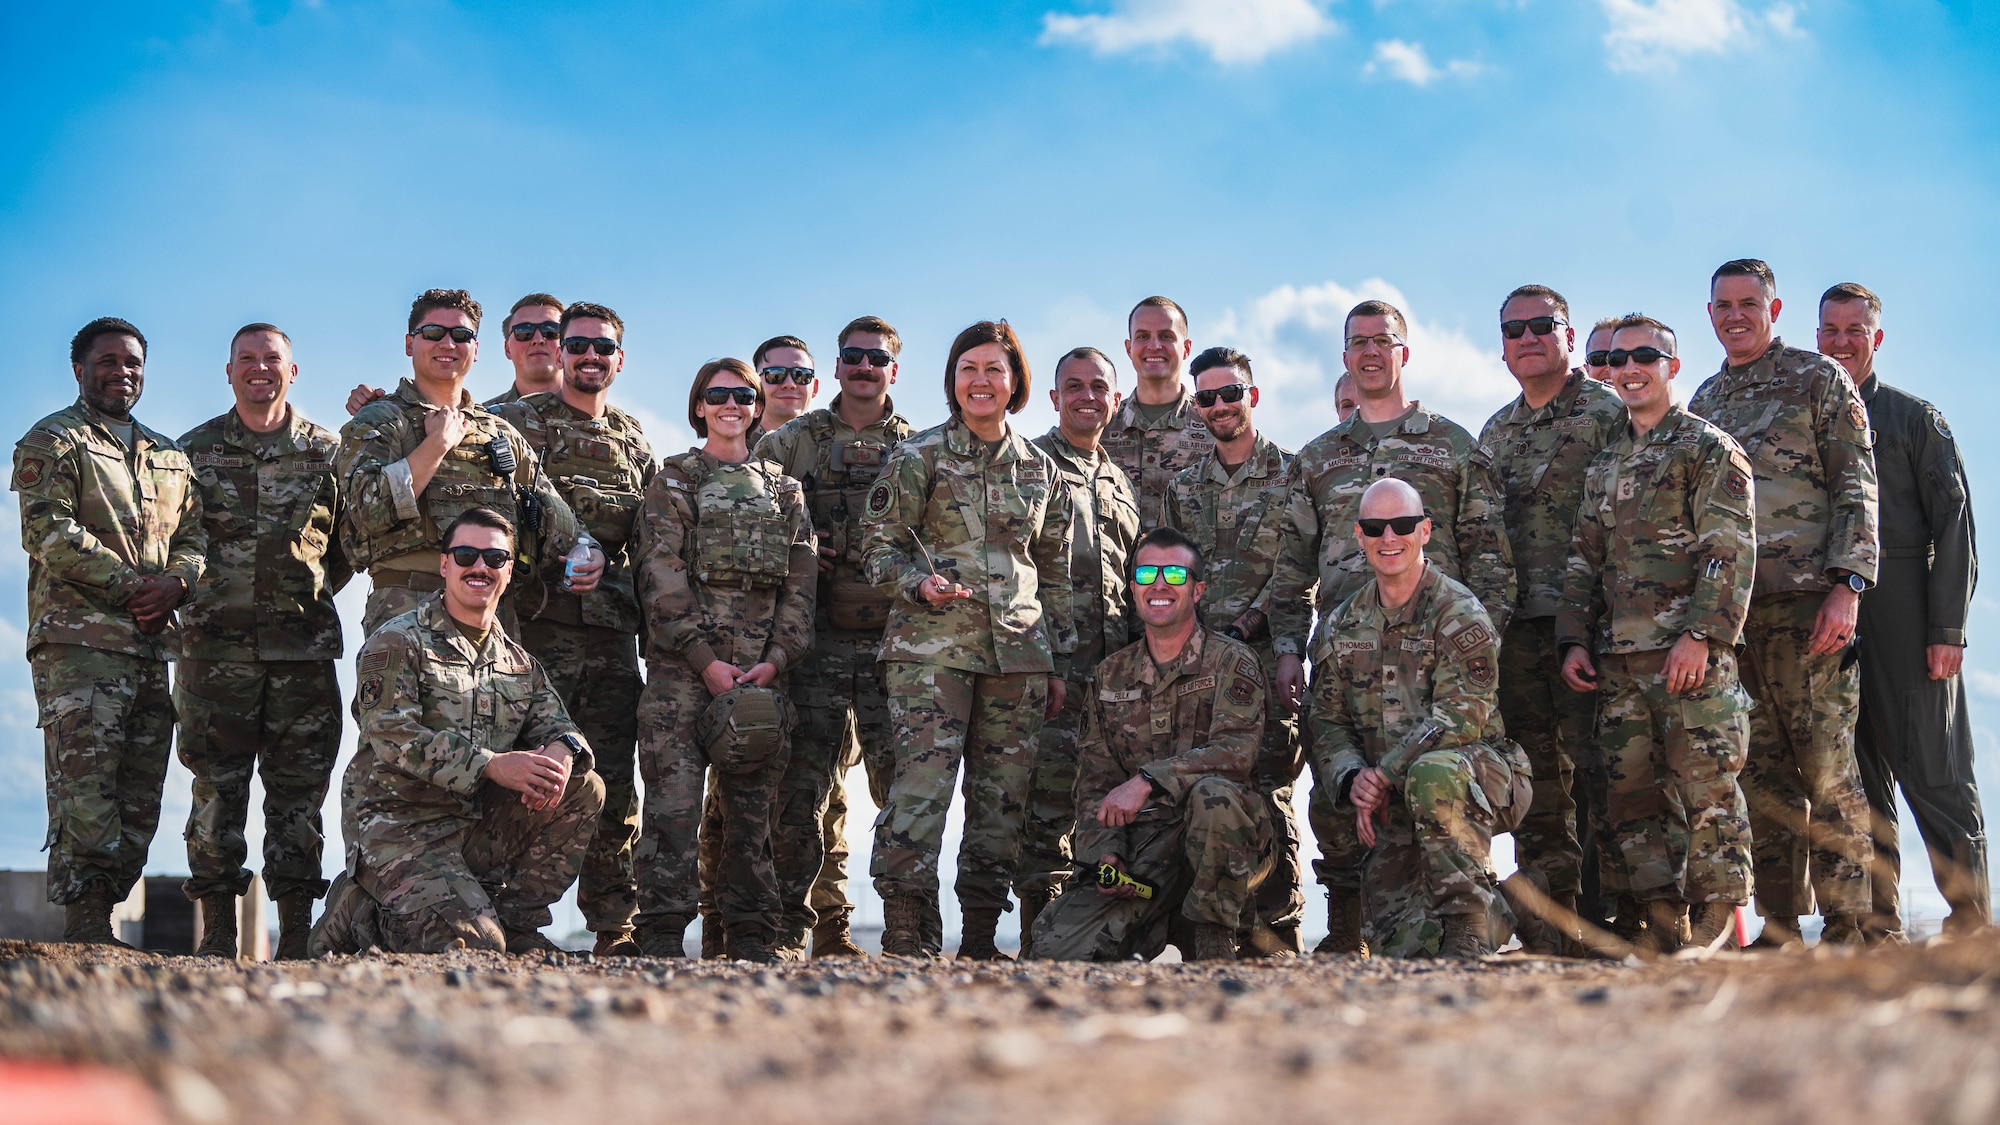 Chief Master Sgt. of the Air Force Joanne Bass poses for a photo with 56th Civil Engineer Squadron Airmen.